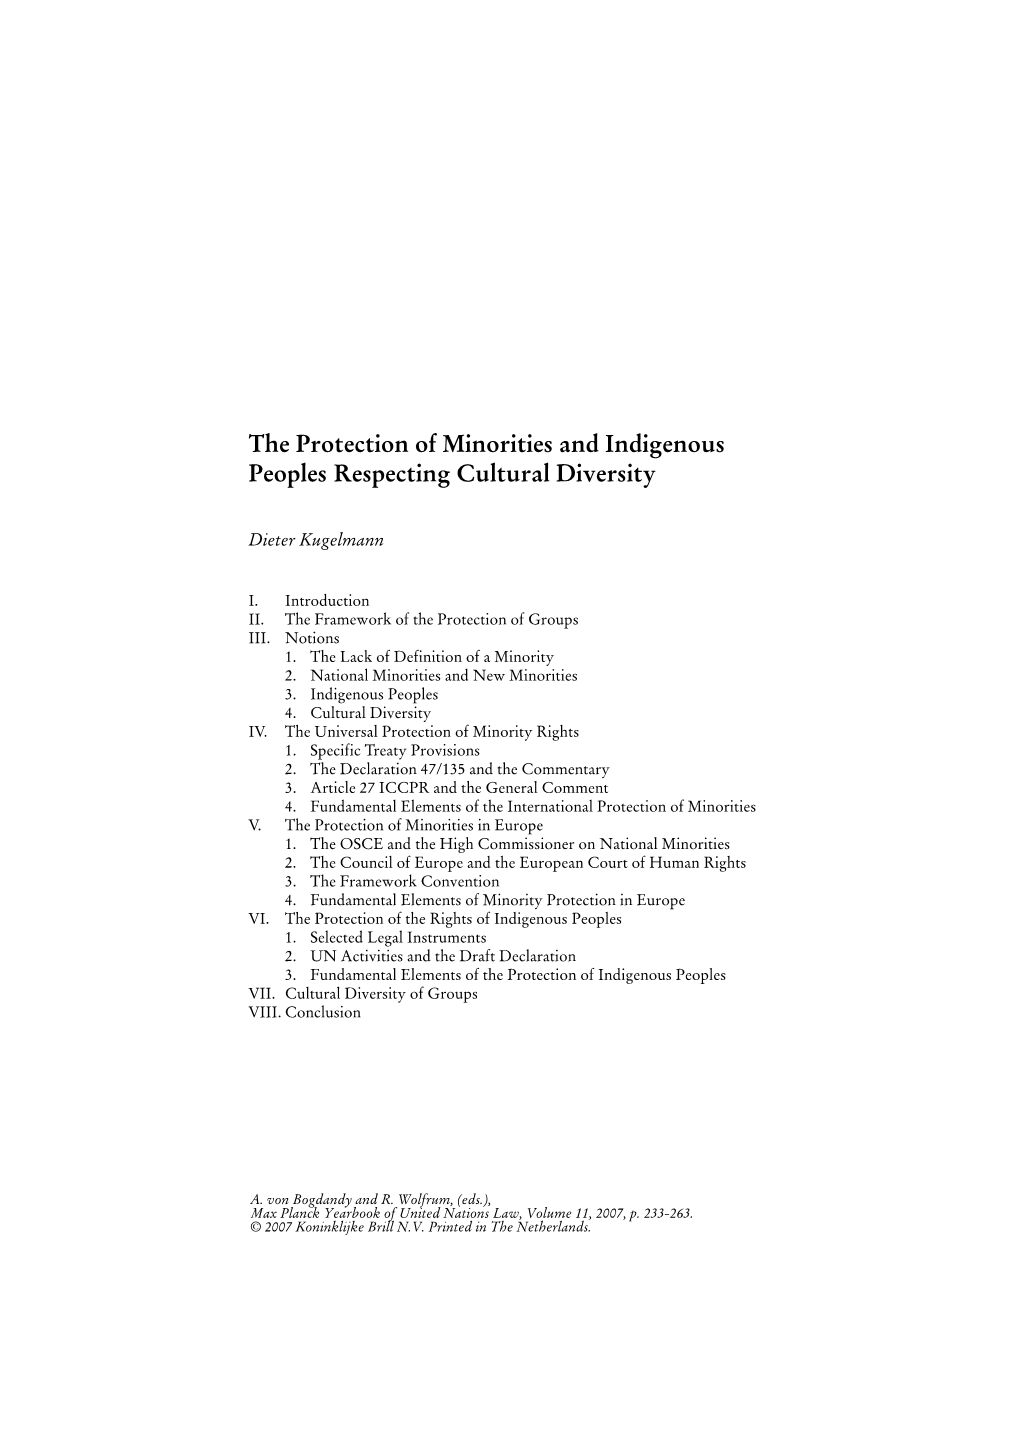 The Protection of Minorities and Indigenous Peoples Respecting Cultural Diversity